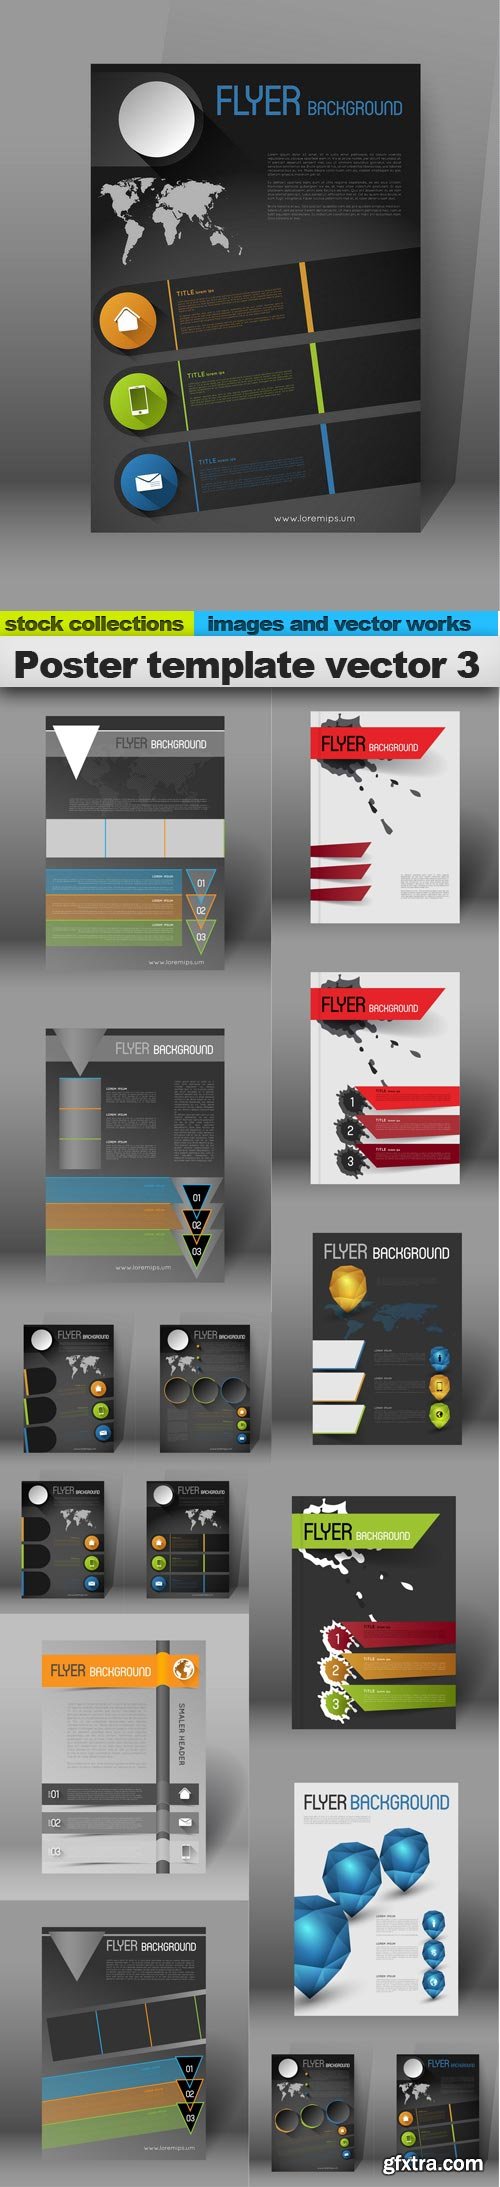 Poster template vector 3, 15 x EPS